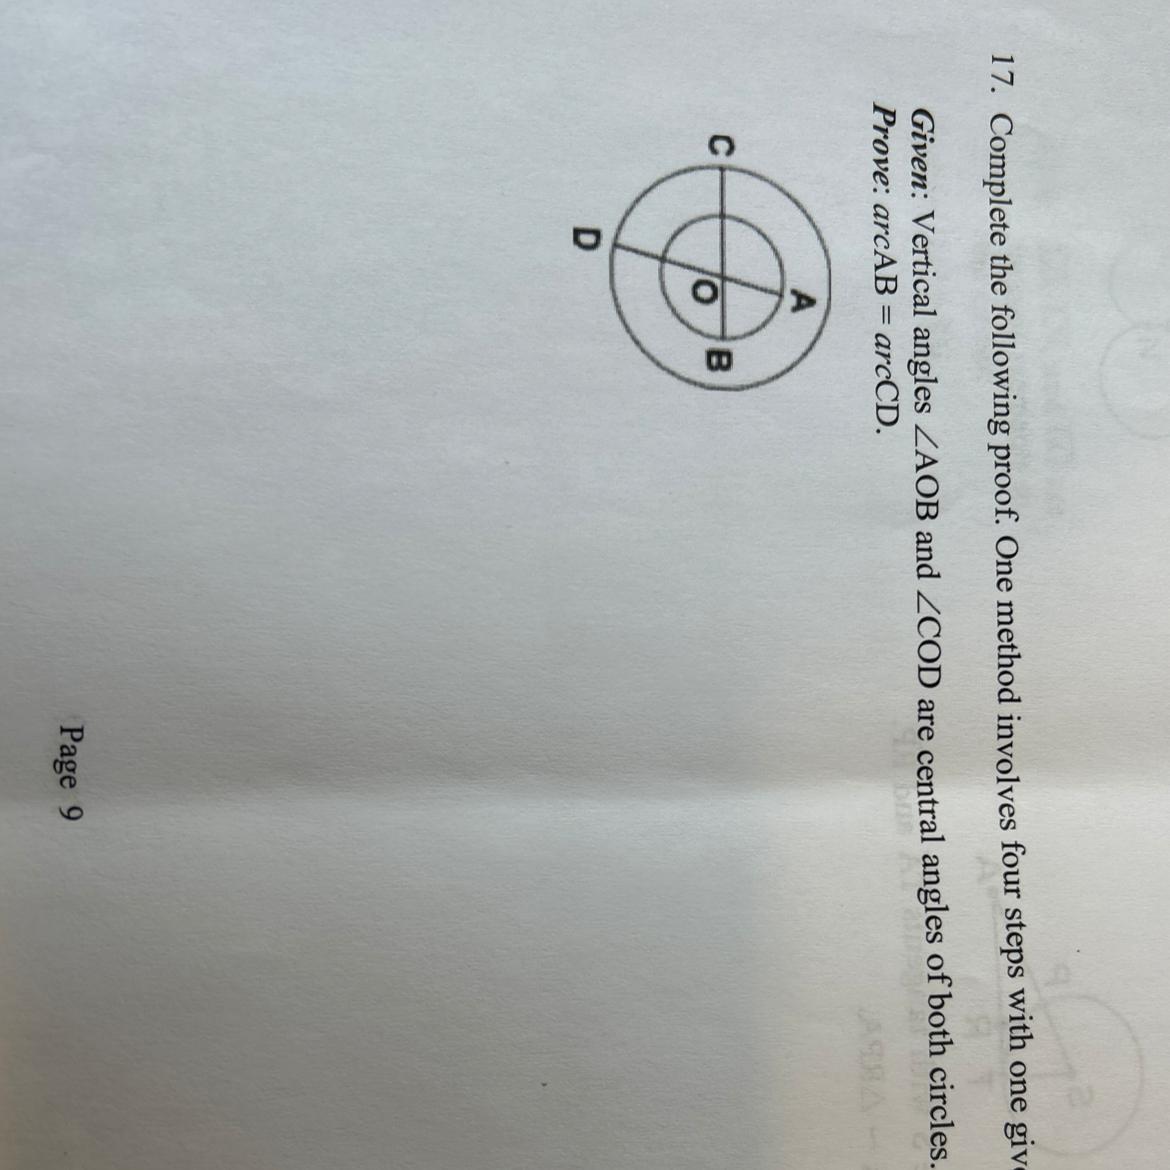 I Need Help Making A Two Column Proof For This Question Please